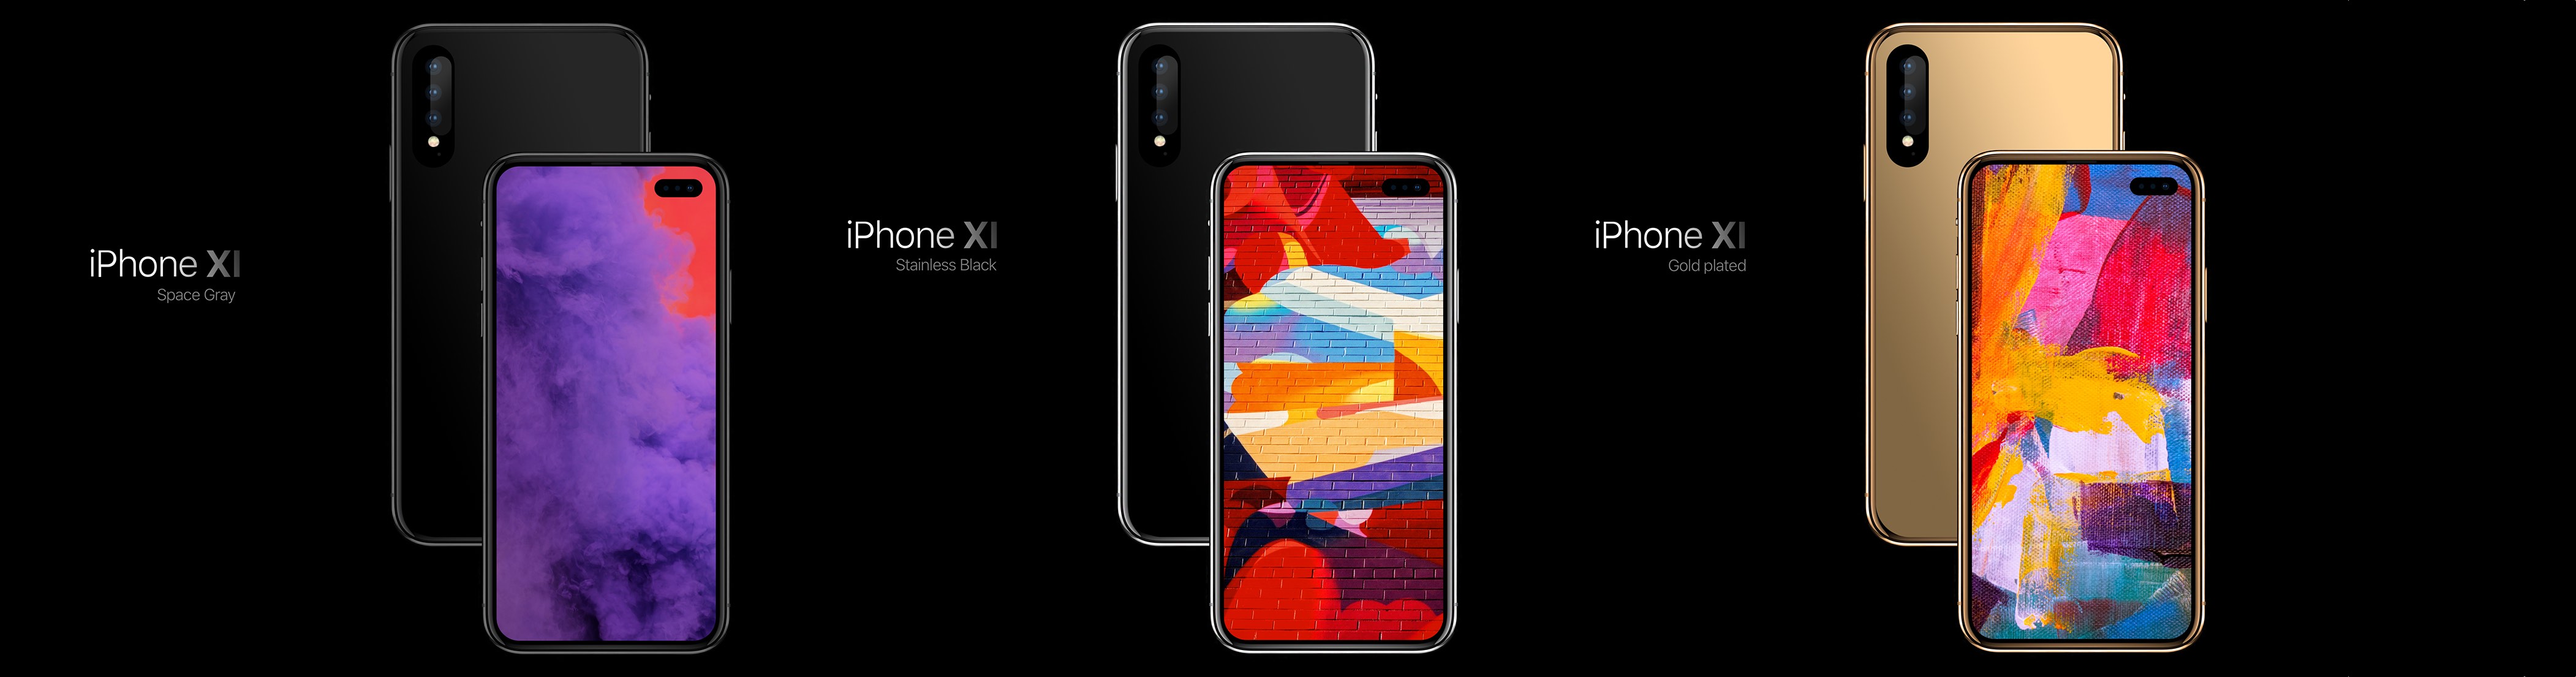 Concept: A Notch-less iPhone With A Hole Punch Display and A Minimal Camera Bump